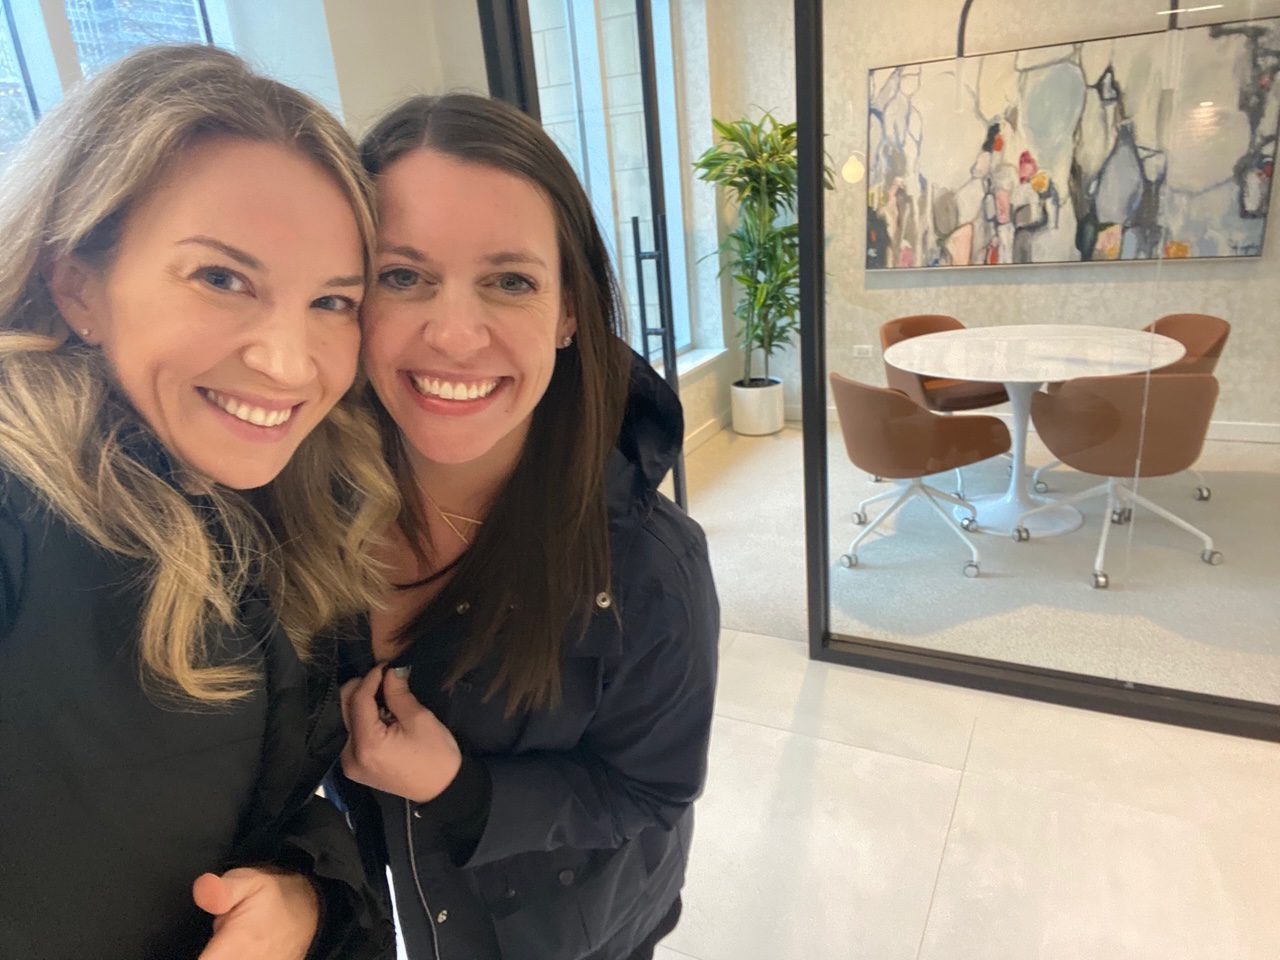 Chicago Leasing Agent and her customer, all smiles!